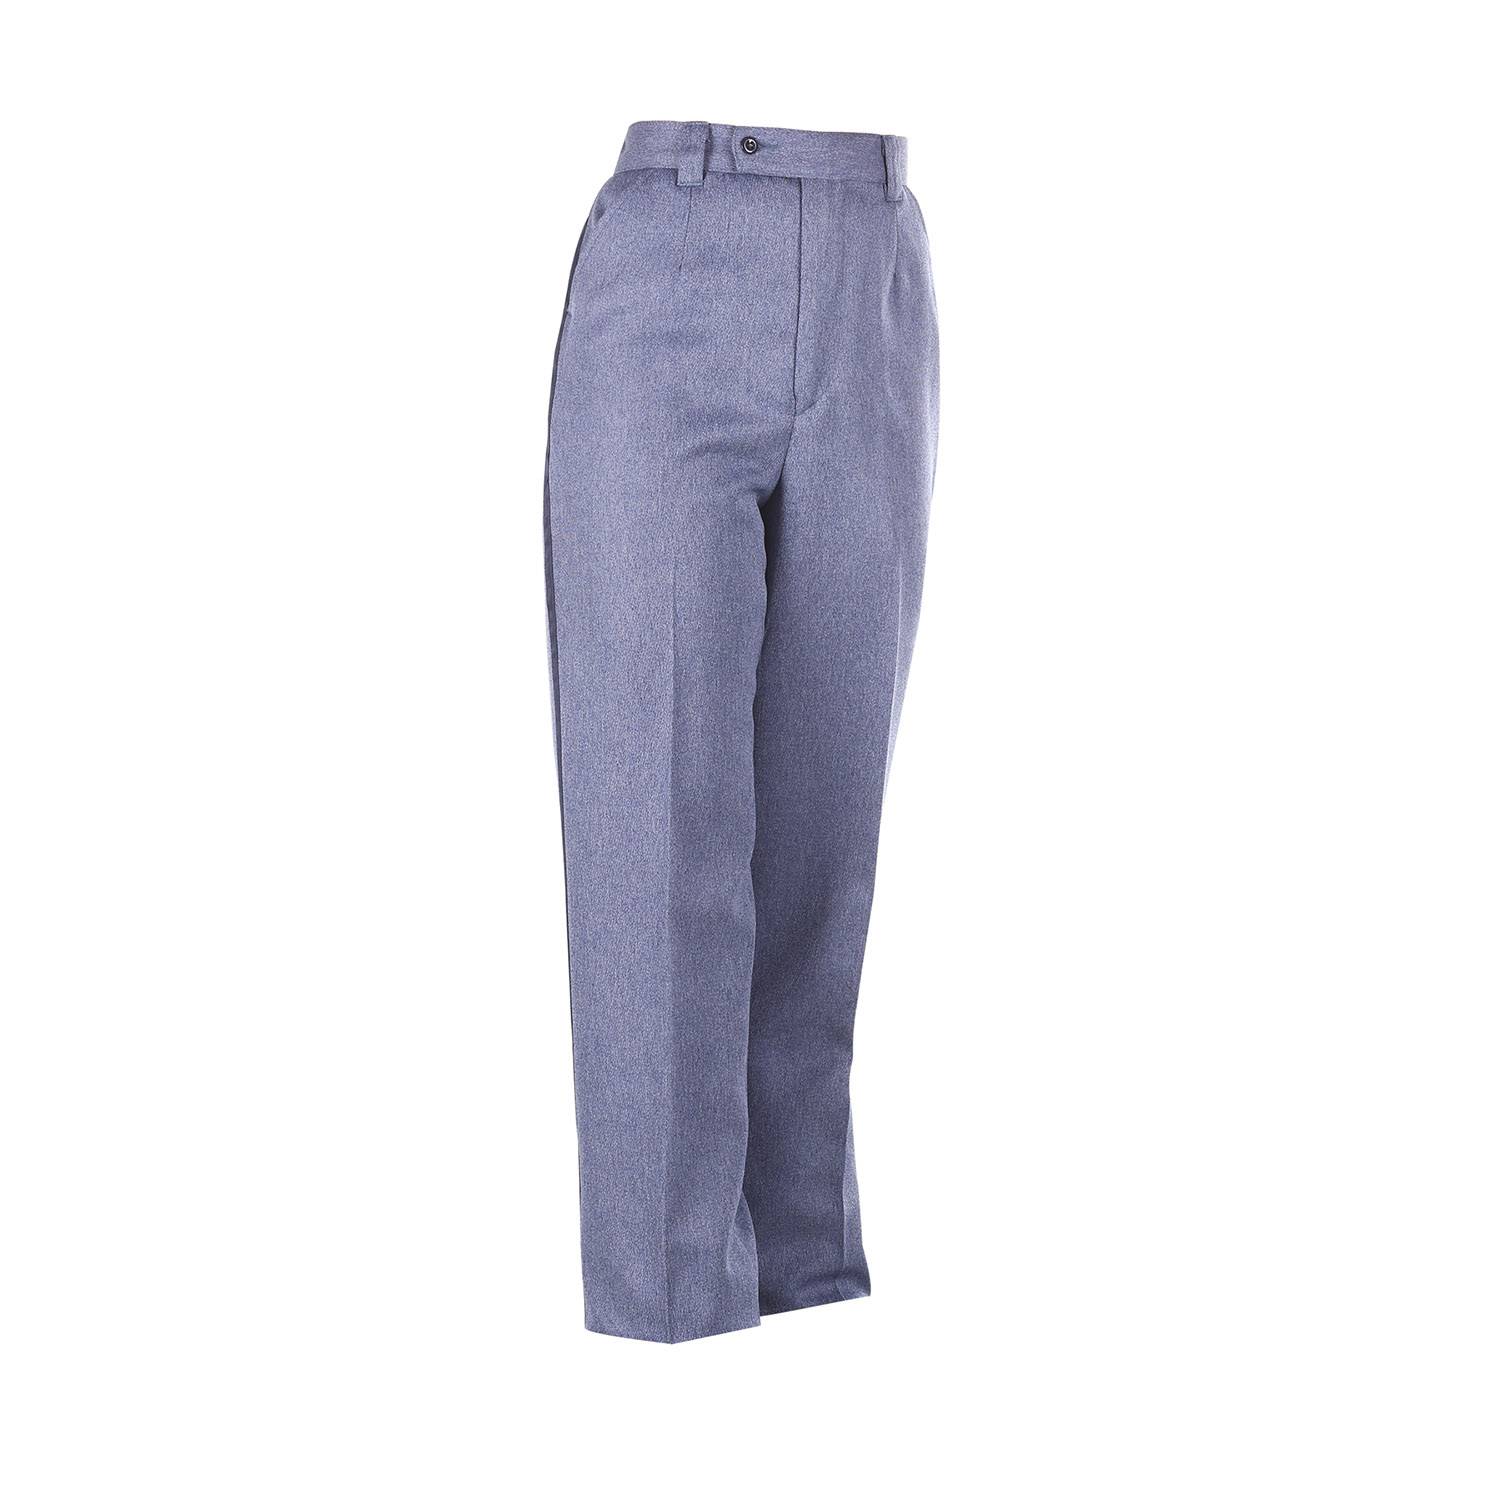 Womens Medium Weight Postal Slacks for Letter Carriers and M